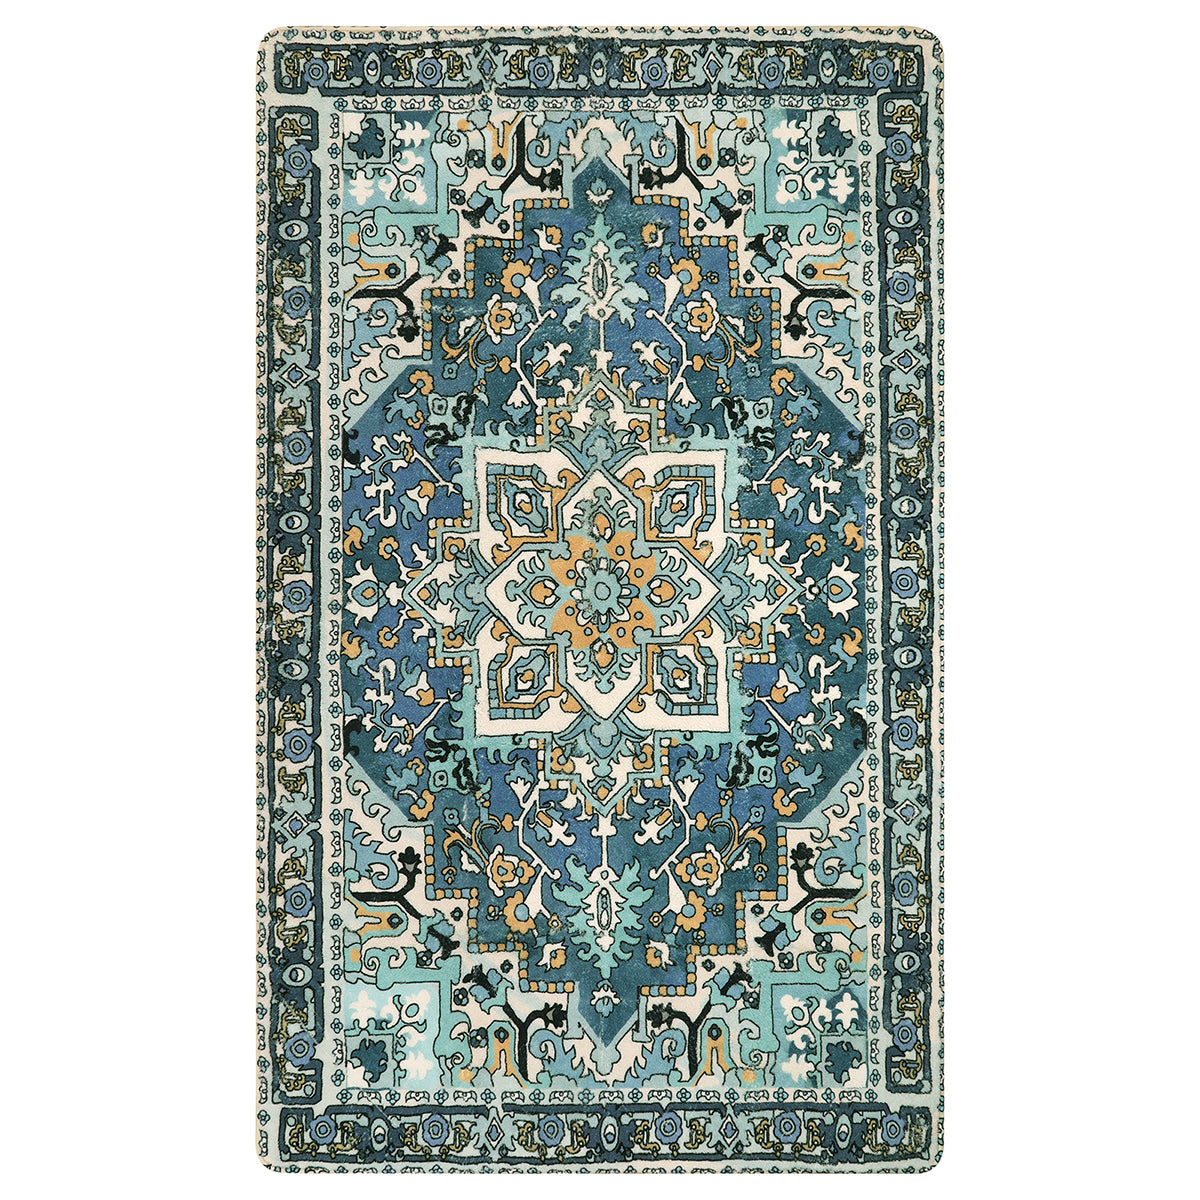 Kennedy - 3x4 Area Rug - The Rug Mine - Free Shipping Worldwide - Authentic  Oriental Rugs